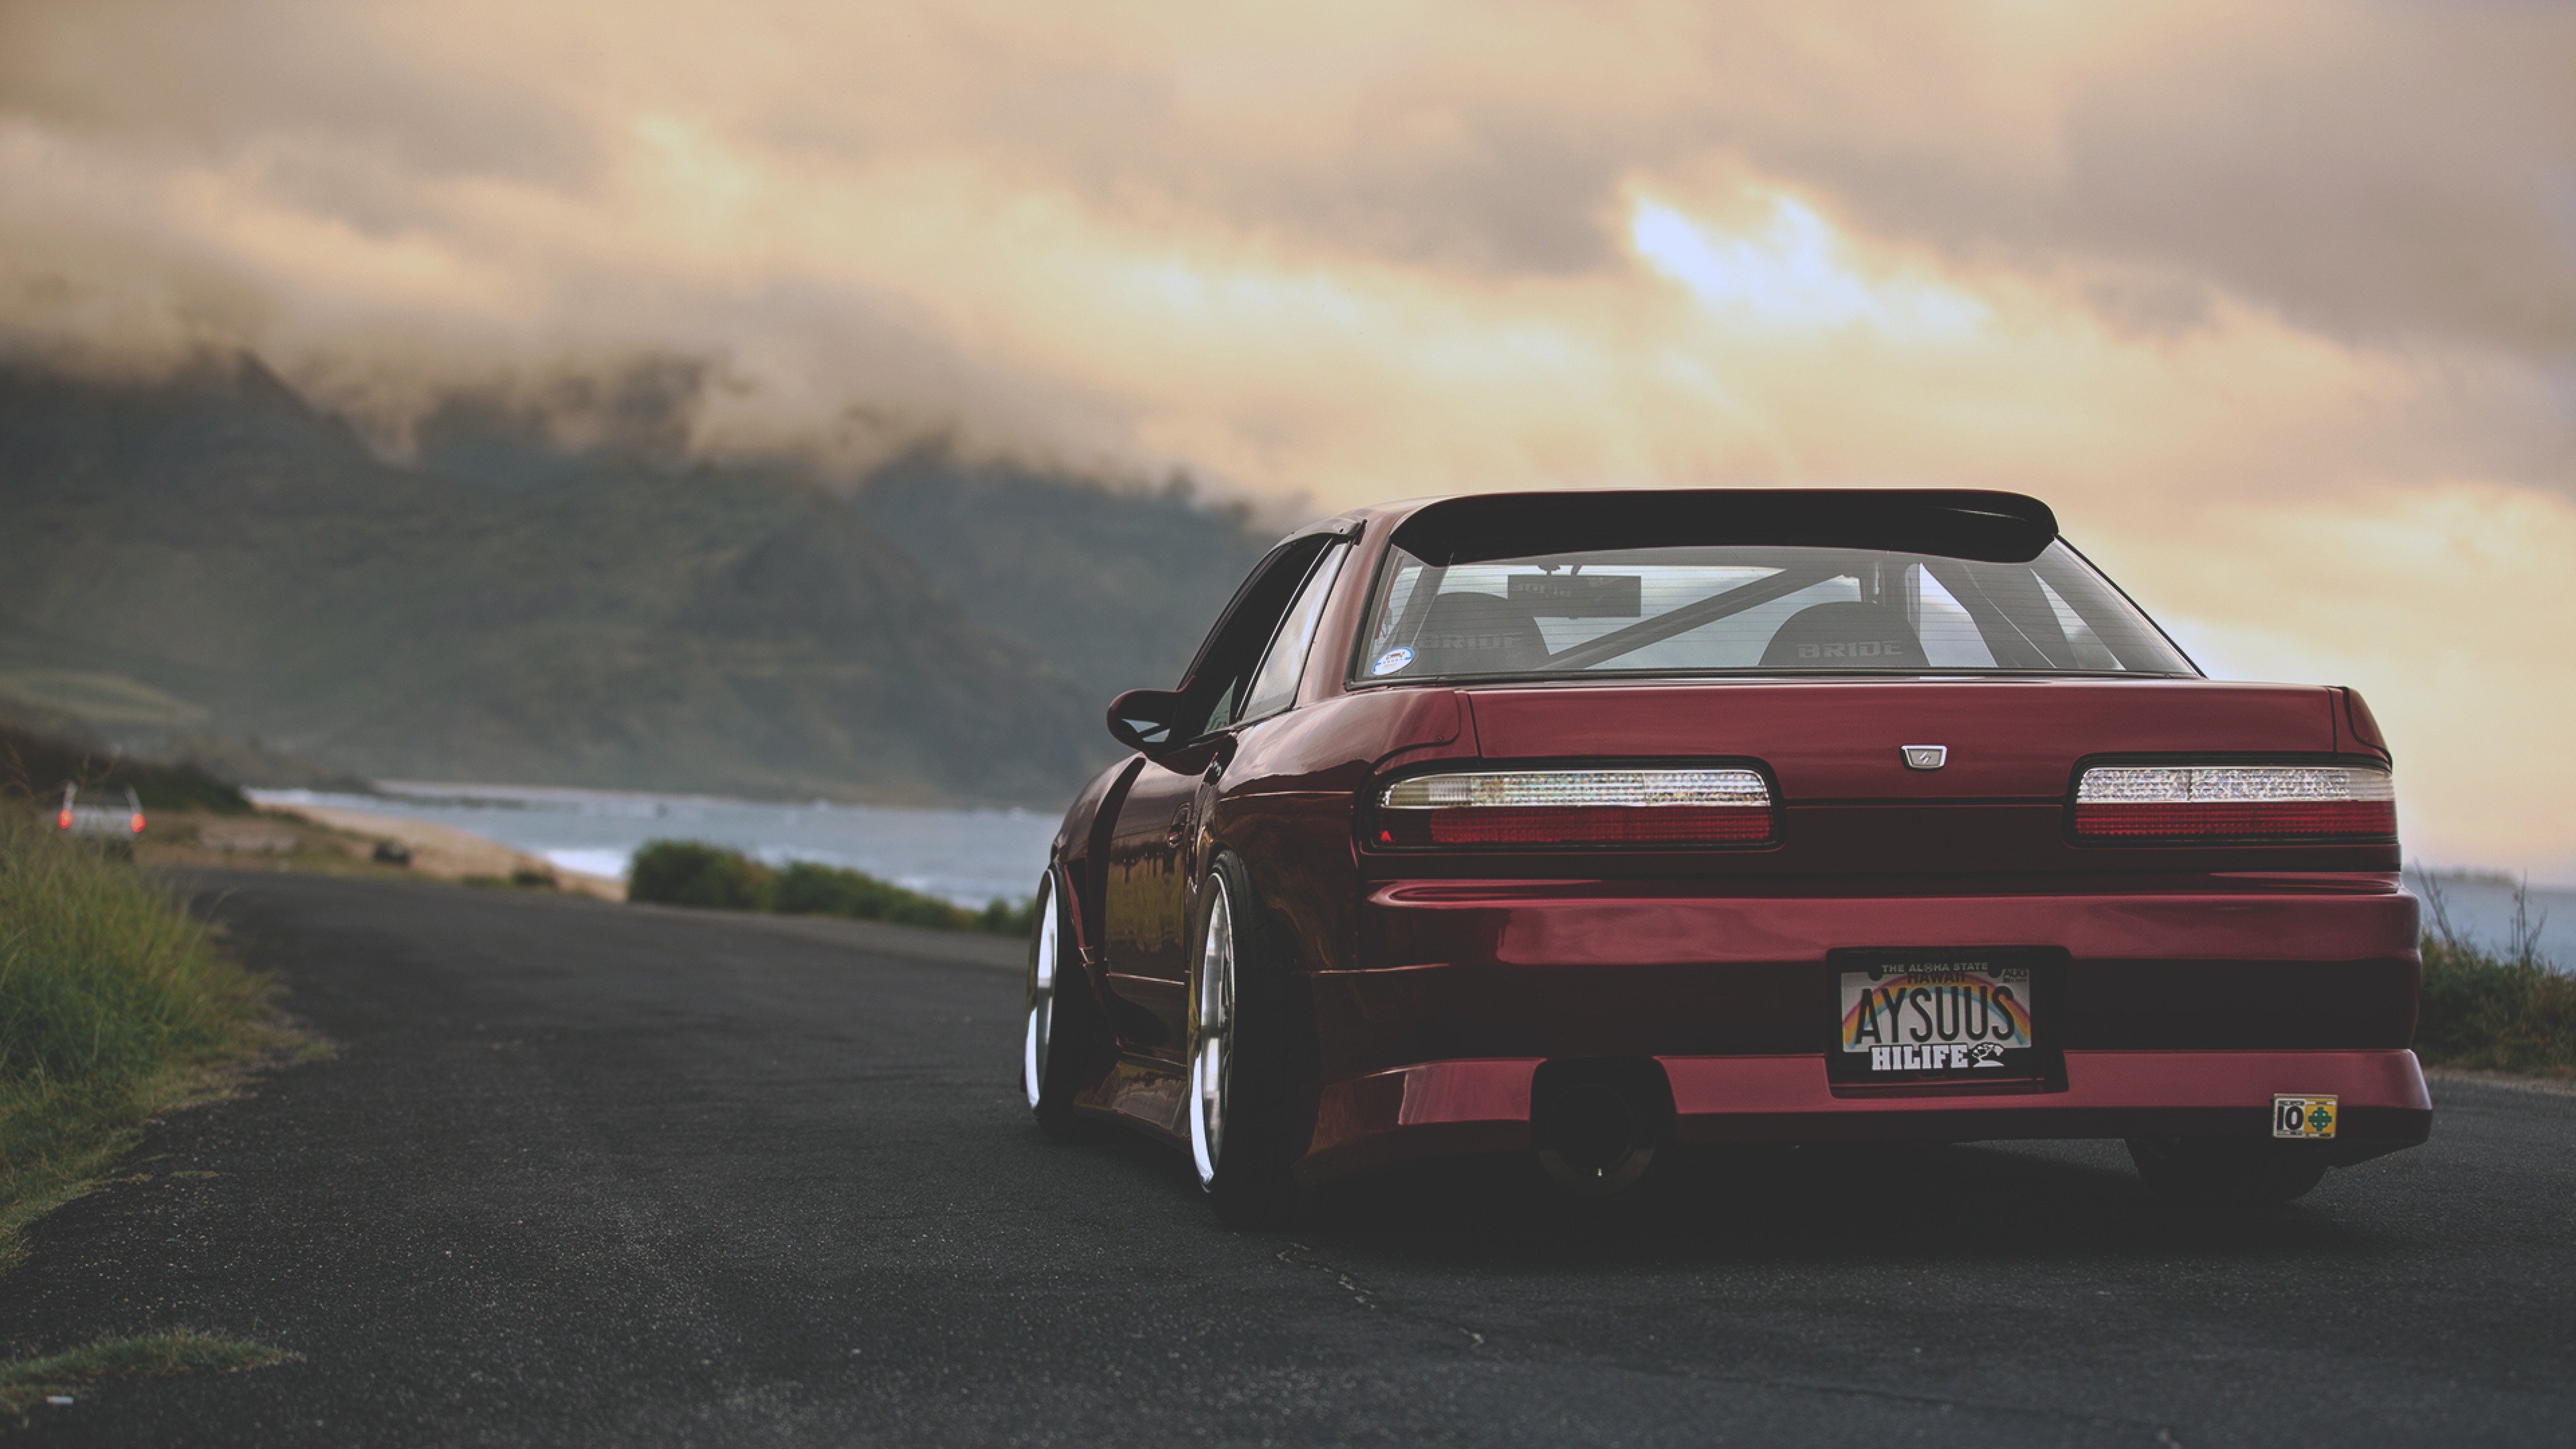 Jdm Aesthetic Wallpaper X See More Ideas About Jdm Wallpaper